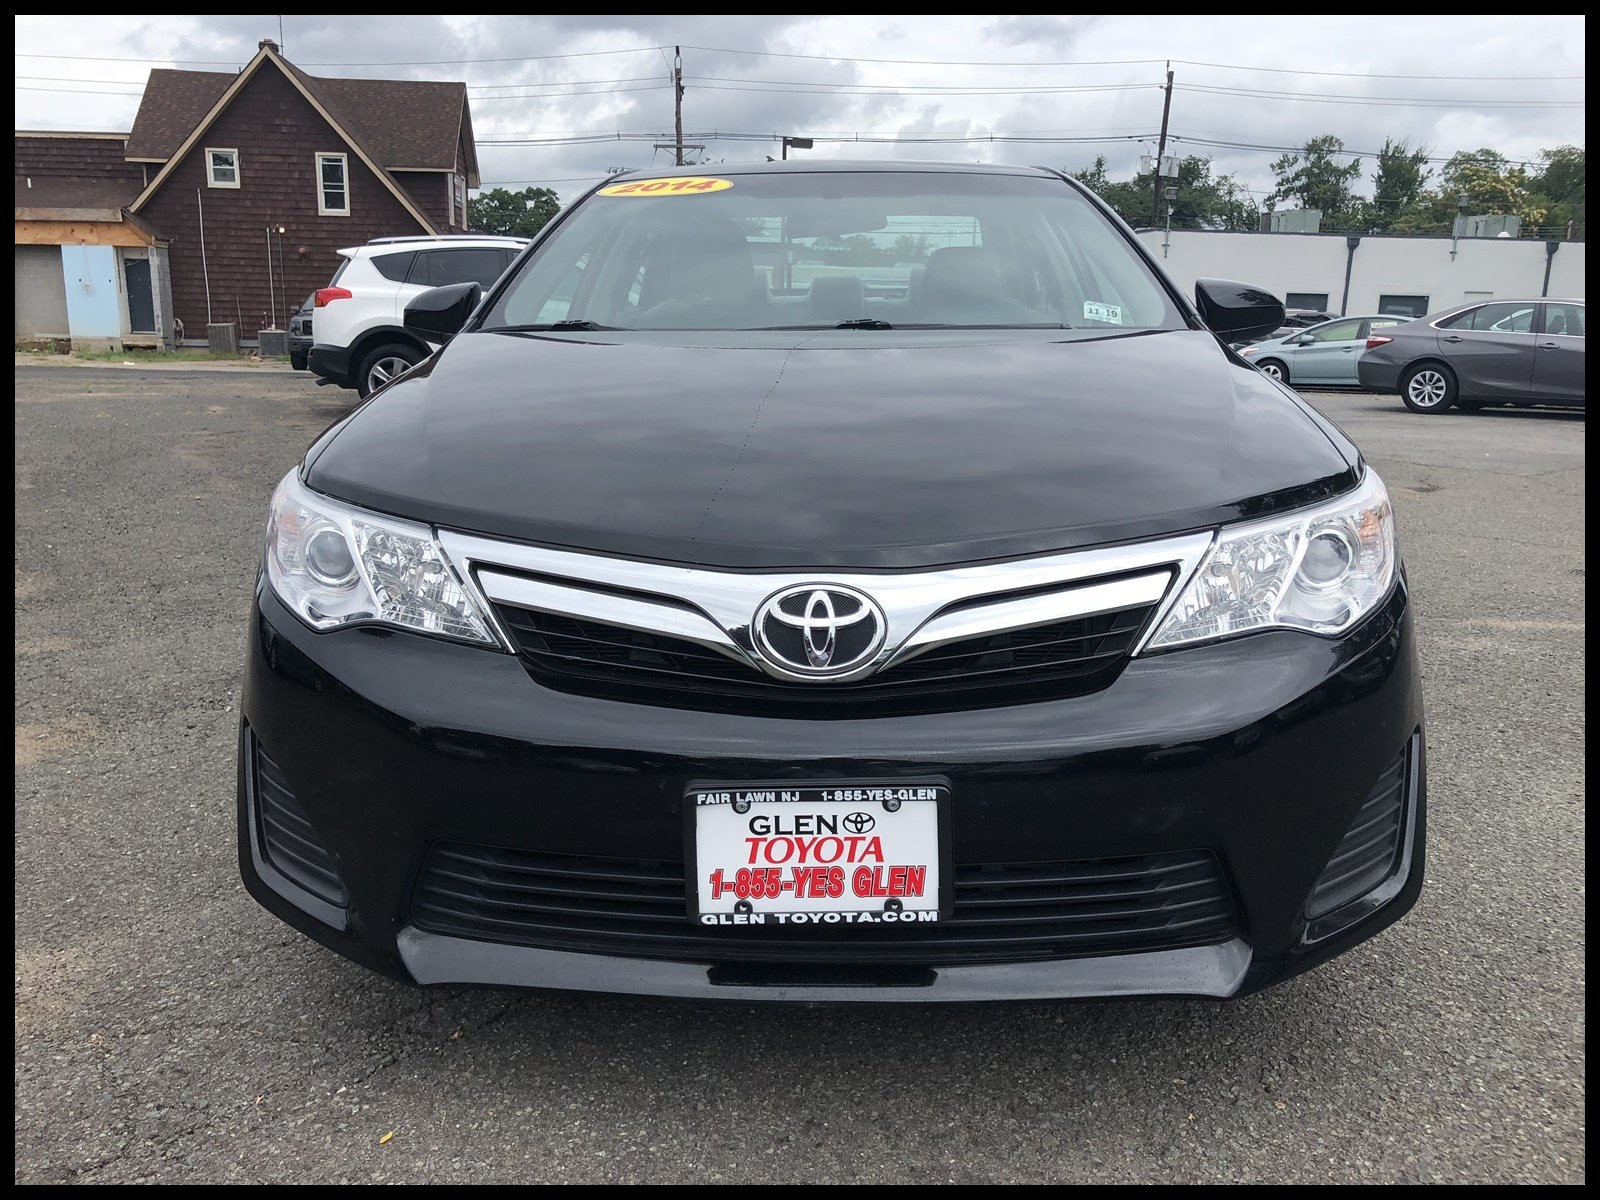 Inspiring 2012 toyota Camry Front Bumper Certified Pre Owned 2014 toyota Camry Le 4dr Car In